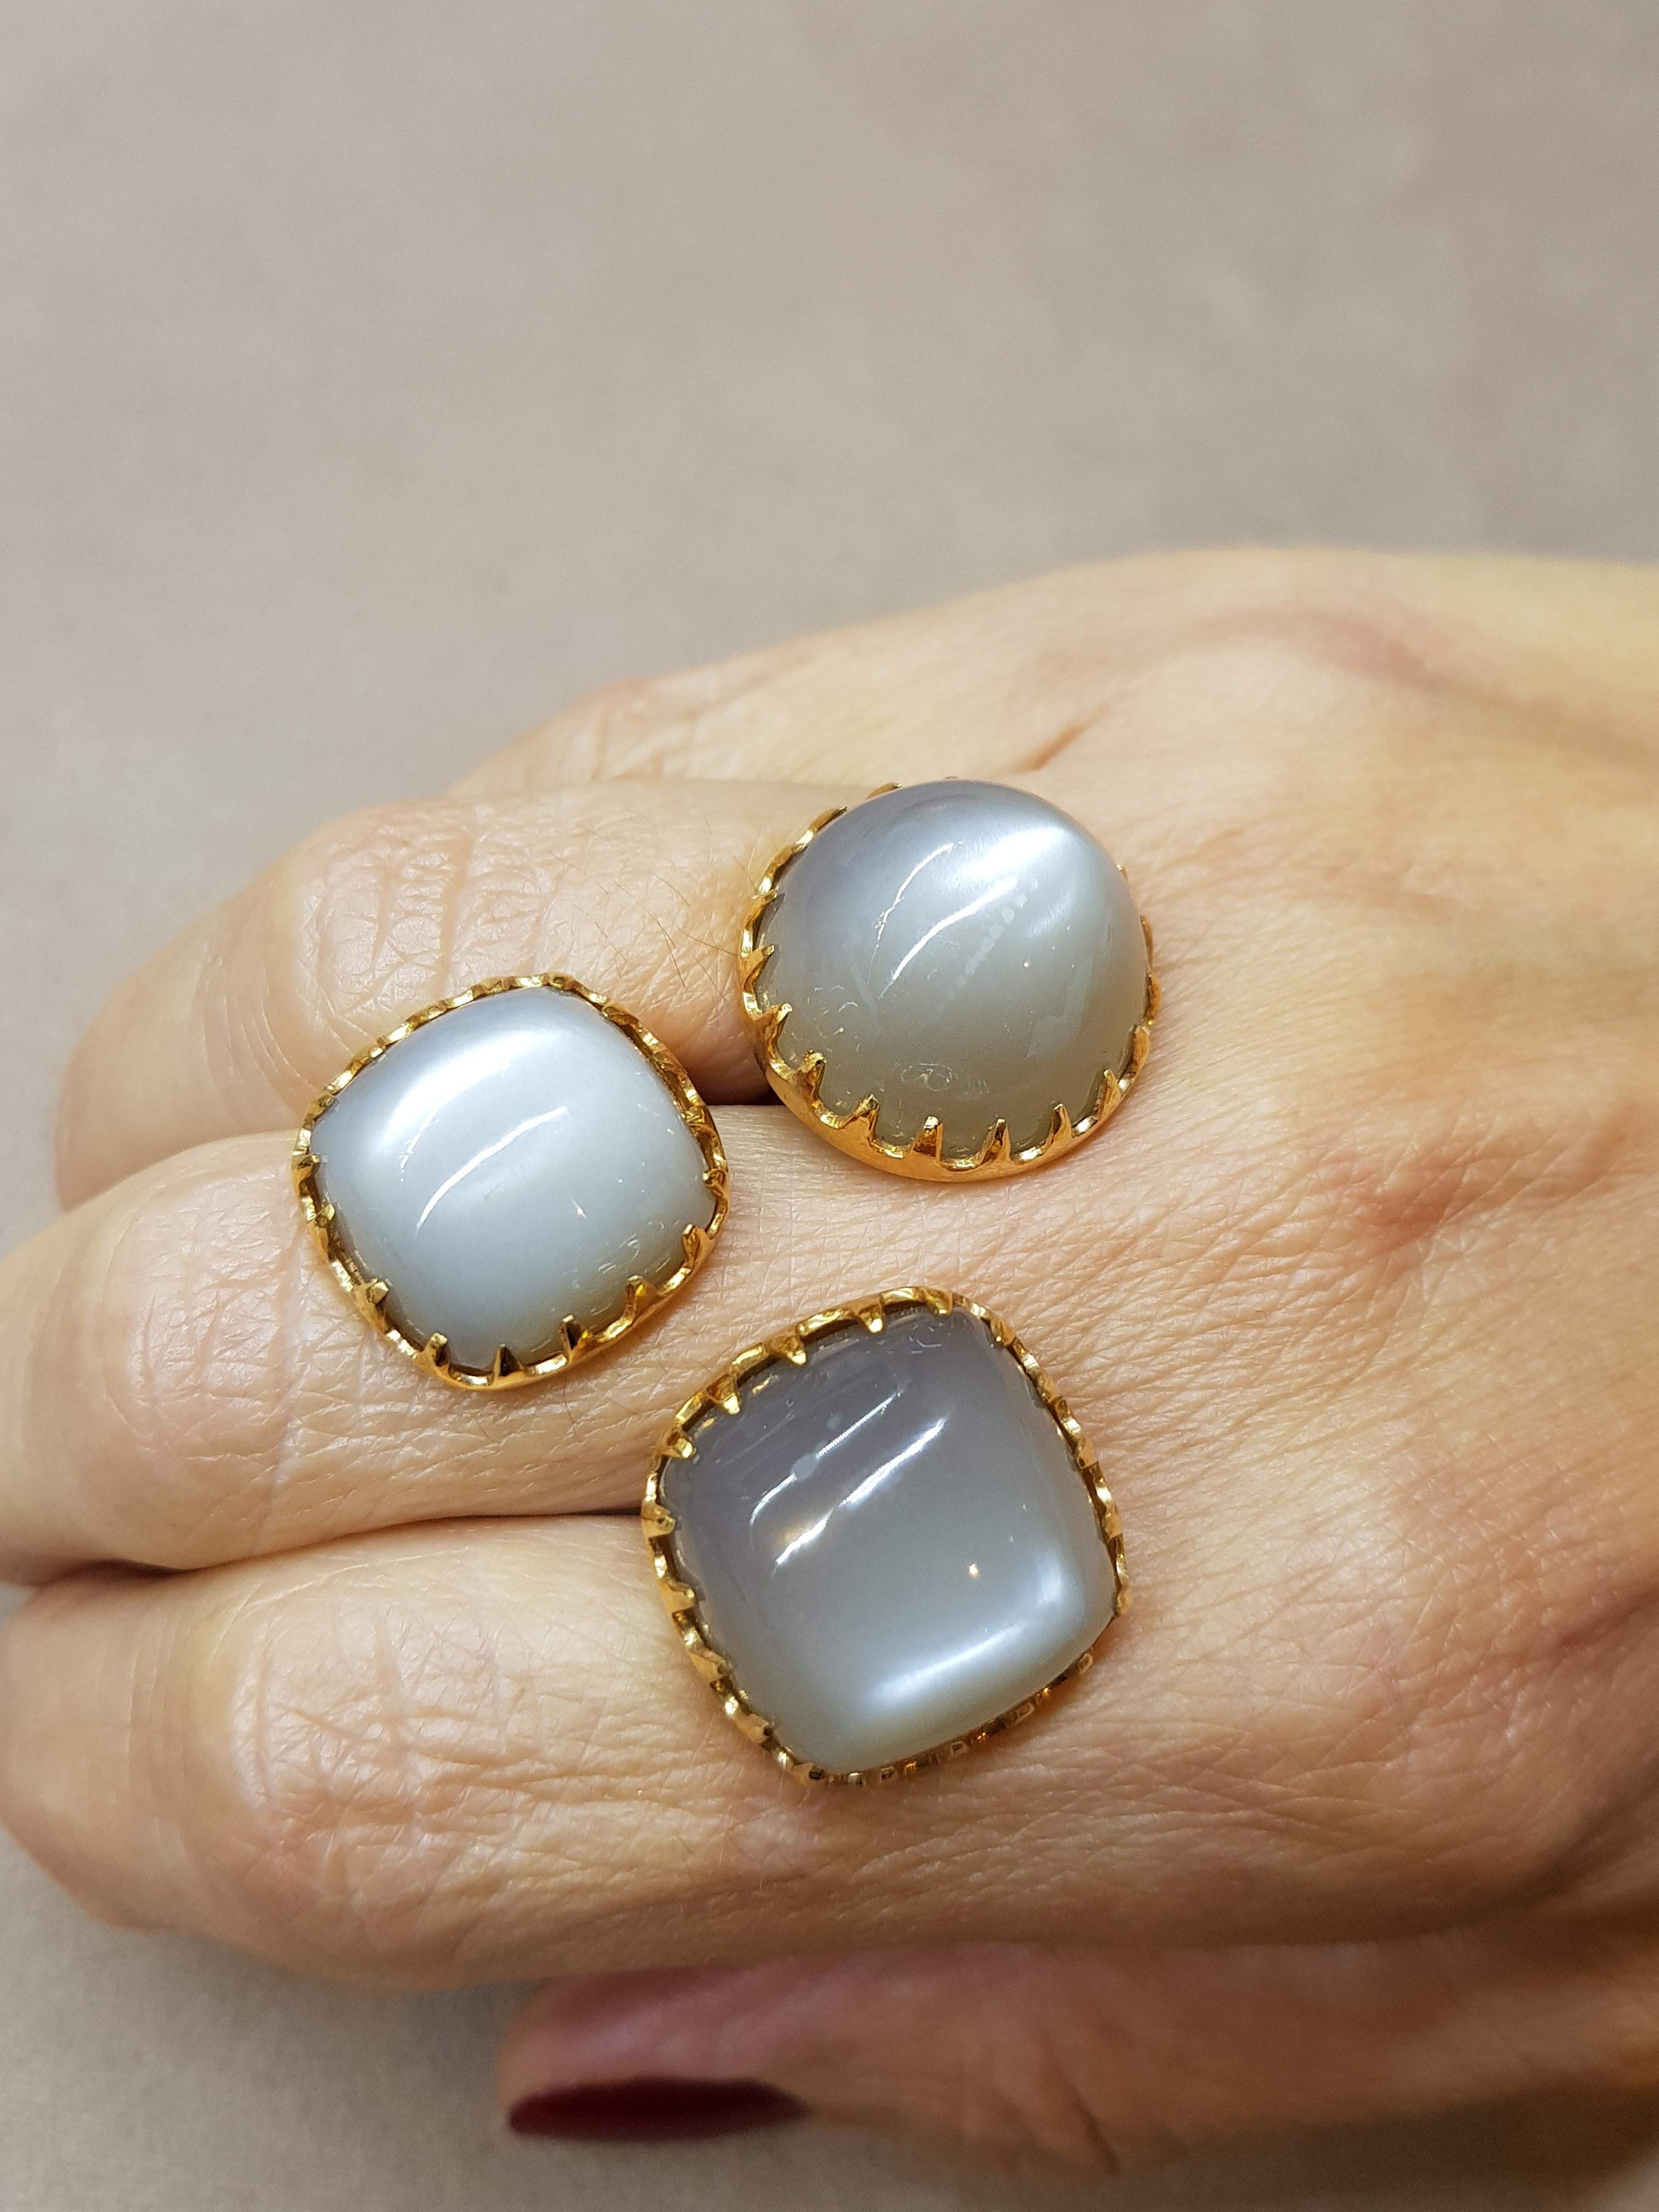 Moonstone has been known for its calming,soothing qualities on the emotional body. Its energry is balancing and healing. To women,Moonstone reveals their feminine power and abilities of clairvoyance and gives to kundalini energy.

18 Karat Gold